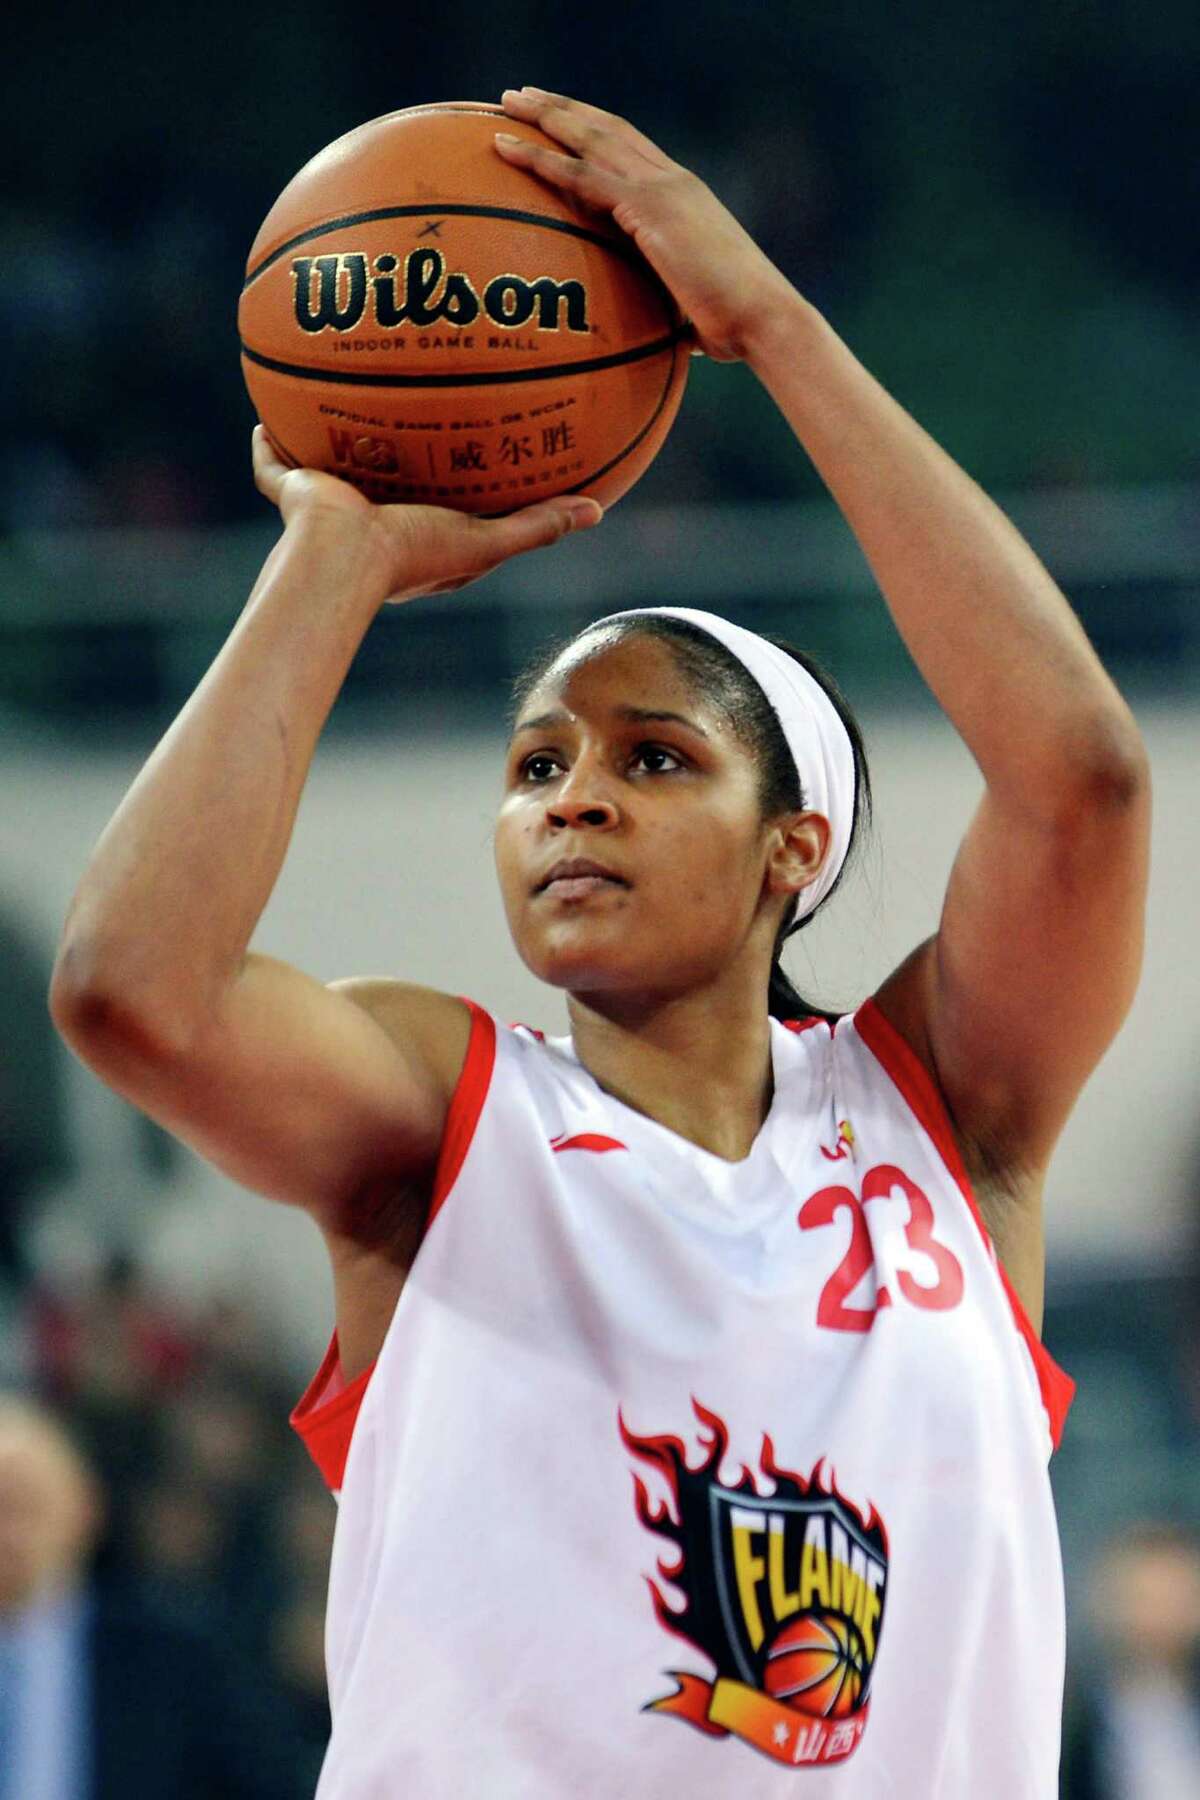 In this Nov. 24, 2012, photo, Shanxi Flame's Maya Moore shoots against the Jiangsu Dragons during a WCBA basketball game in Taiyuan, China. While her Minnesota Lynx team awaits the return of WNBA training camp in May, Moore is averaging 45 points a game and earning mid-six figures for the Flame, helping bring new fans to the women's game in a baseball crazed nation. (AP Photo/CHINATOPIX) CHINA OUT